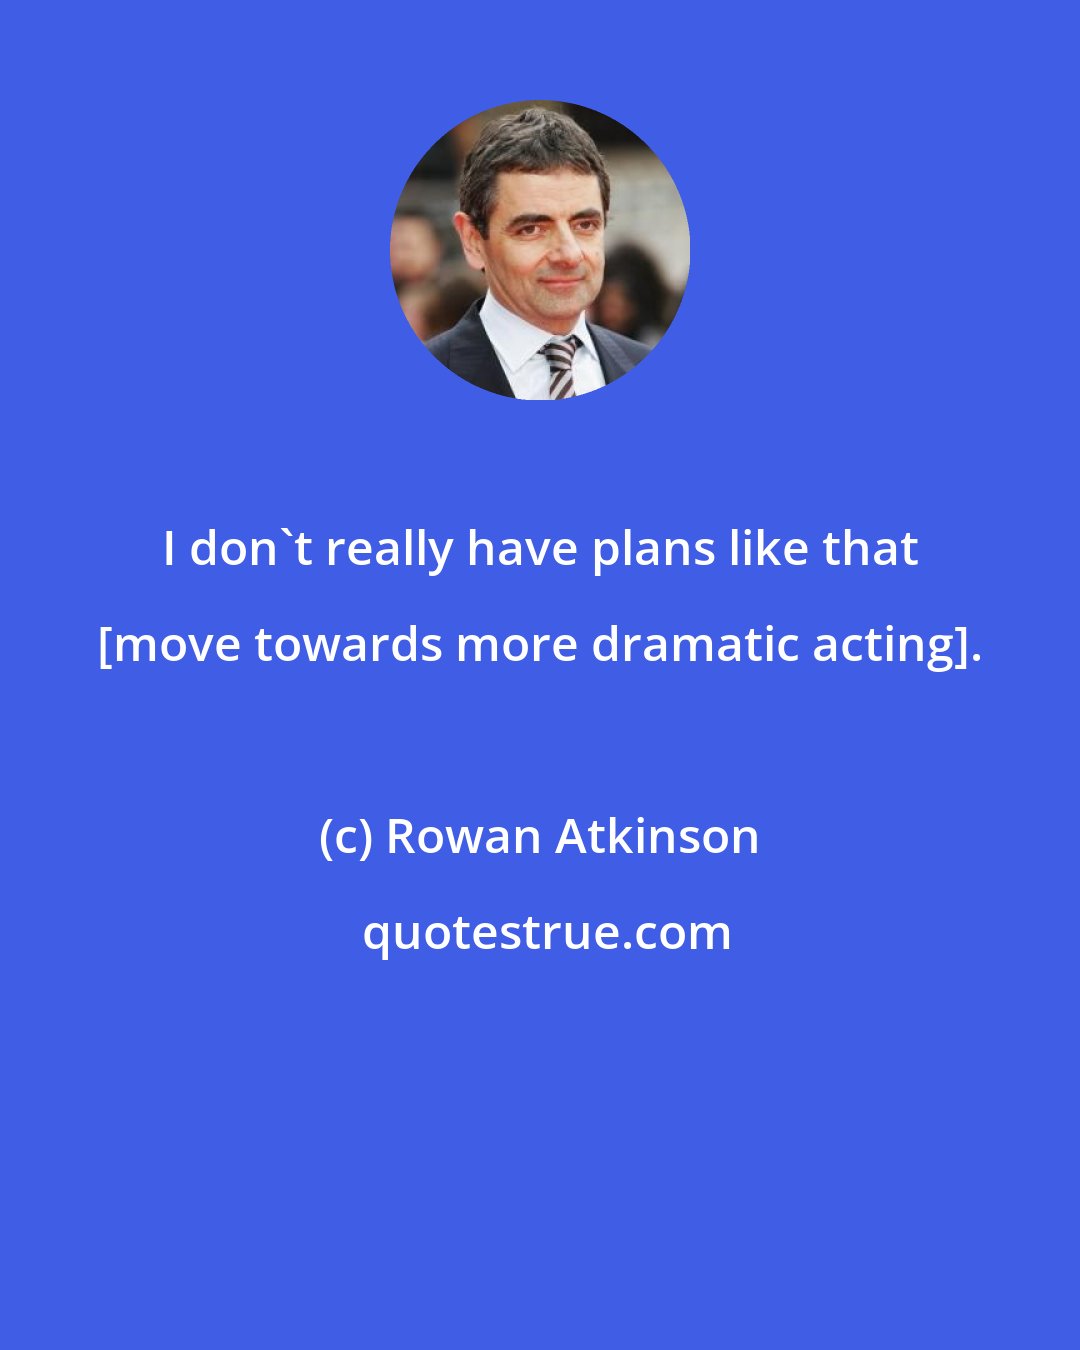 Rowan Atkinson: I don't really have plans like that [move towards more dramatic acting].